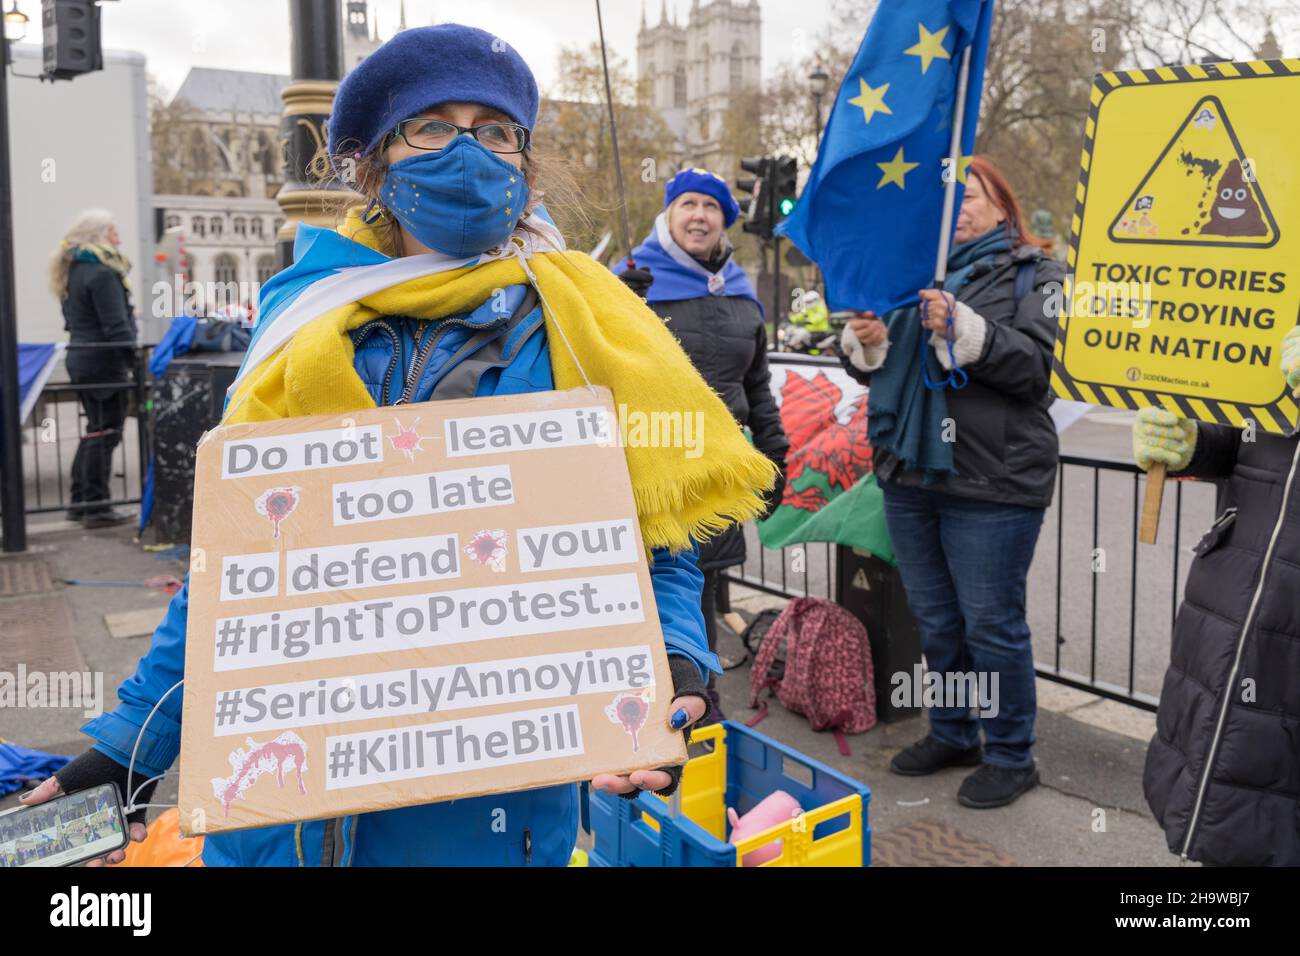 London Westminster UK 08 December 2021: A group of protestors in Parliament square opposing a new policing bill put forward by the Government ,  its third reading in the House of Lords this week, the bill disallows peaceful protests and marches. Credit: Xiu Bao/Alamy Live News Stock Photo